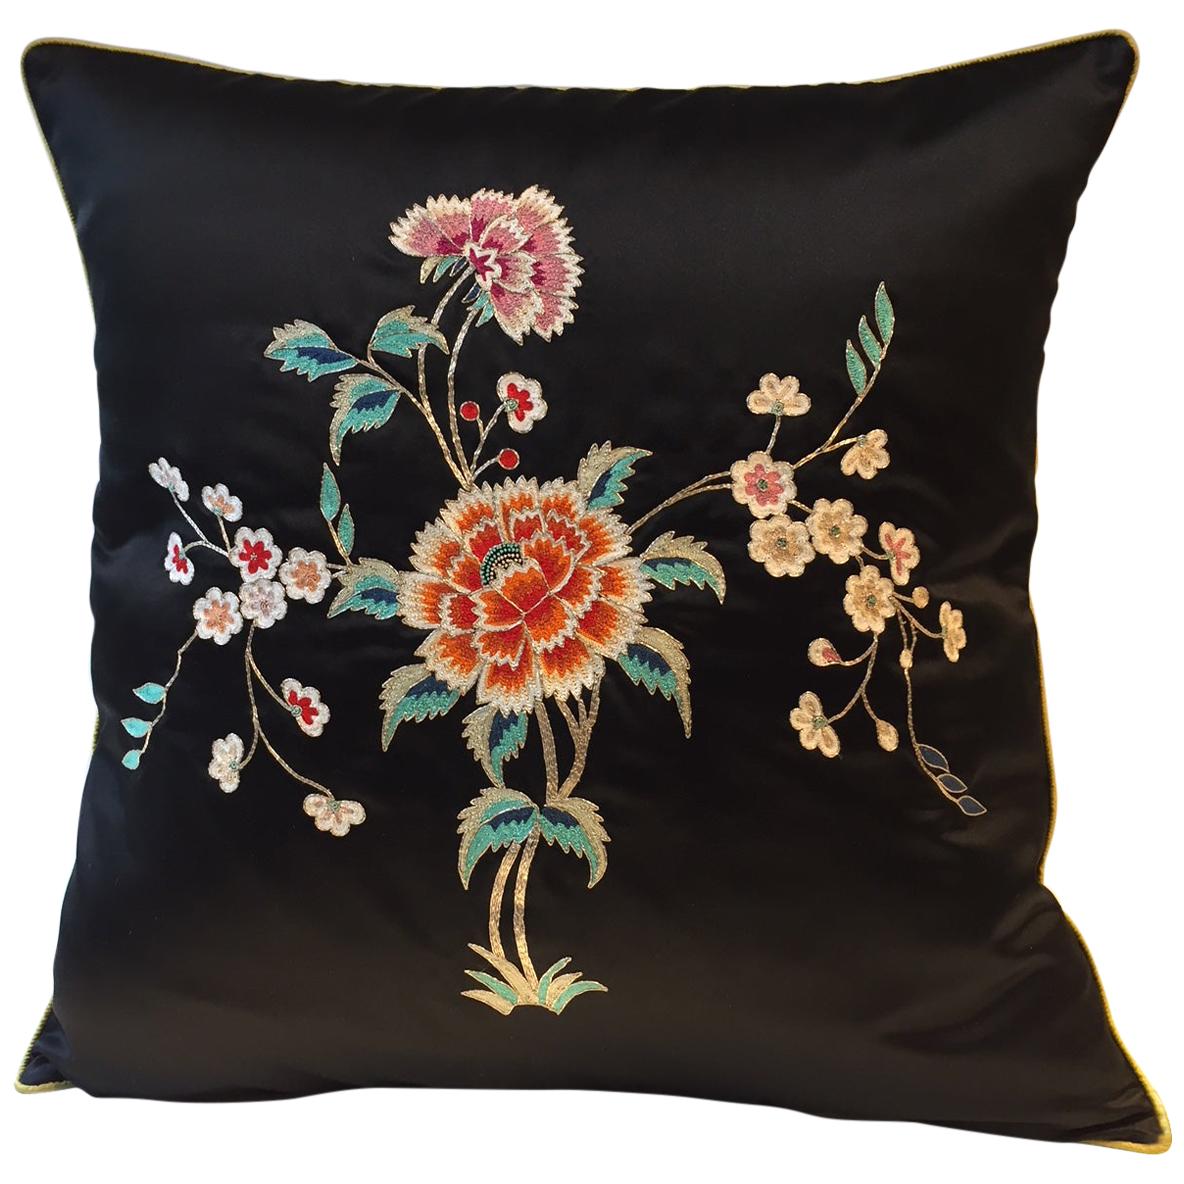 Decorative Silk Cushions with Hand Embroidery and Hand-Painting Color ...